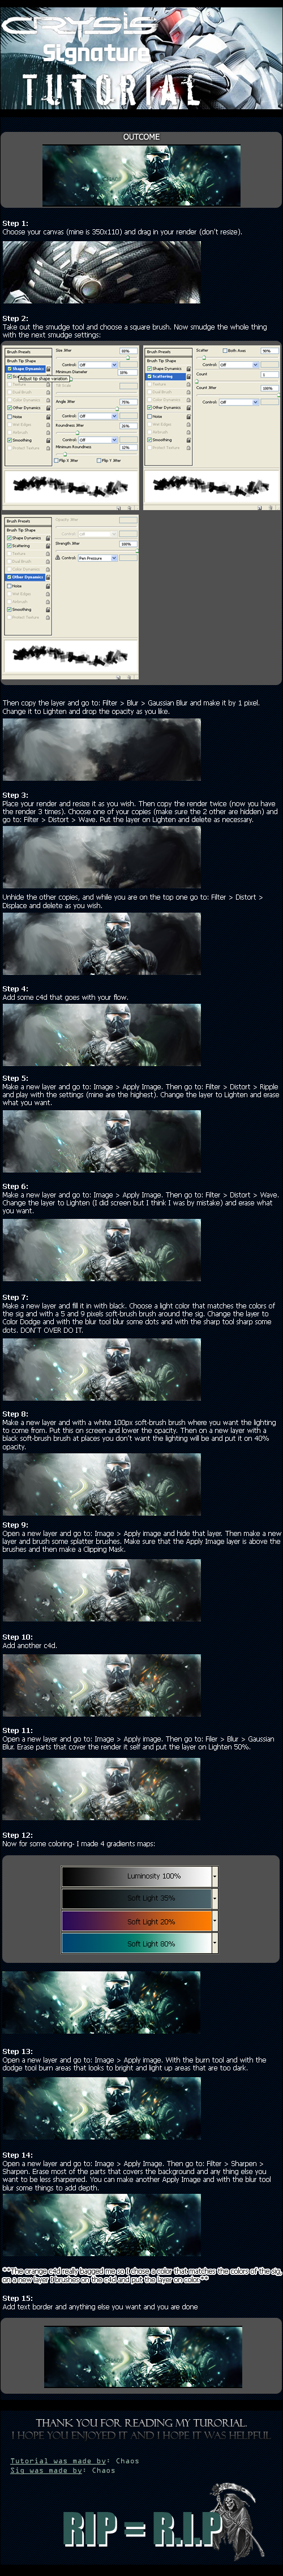 Crysis_Signature_Tutorial_by_Chaos_Tutorials